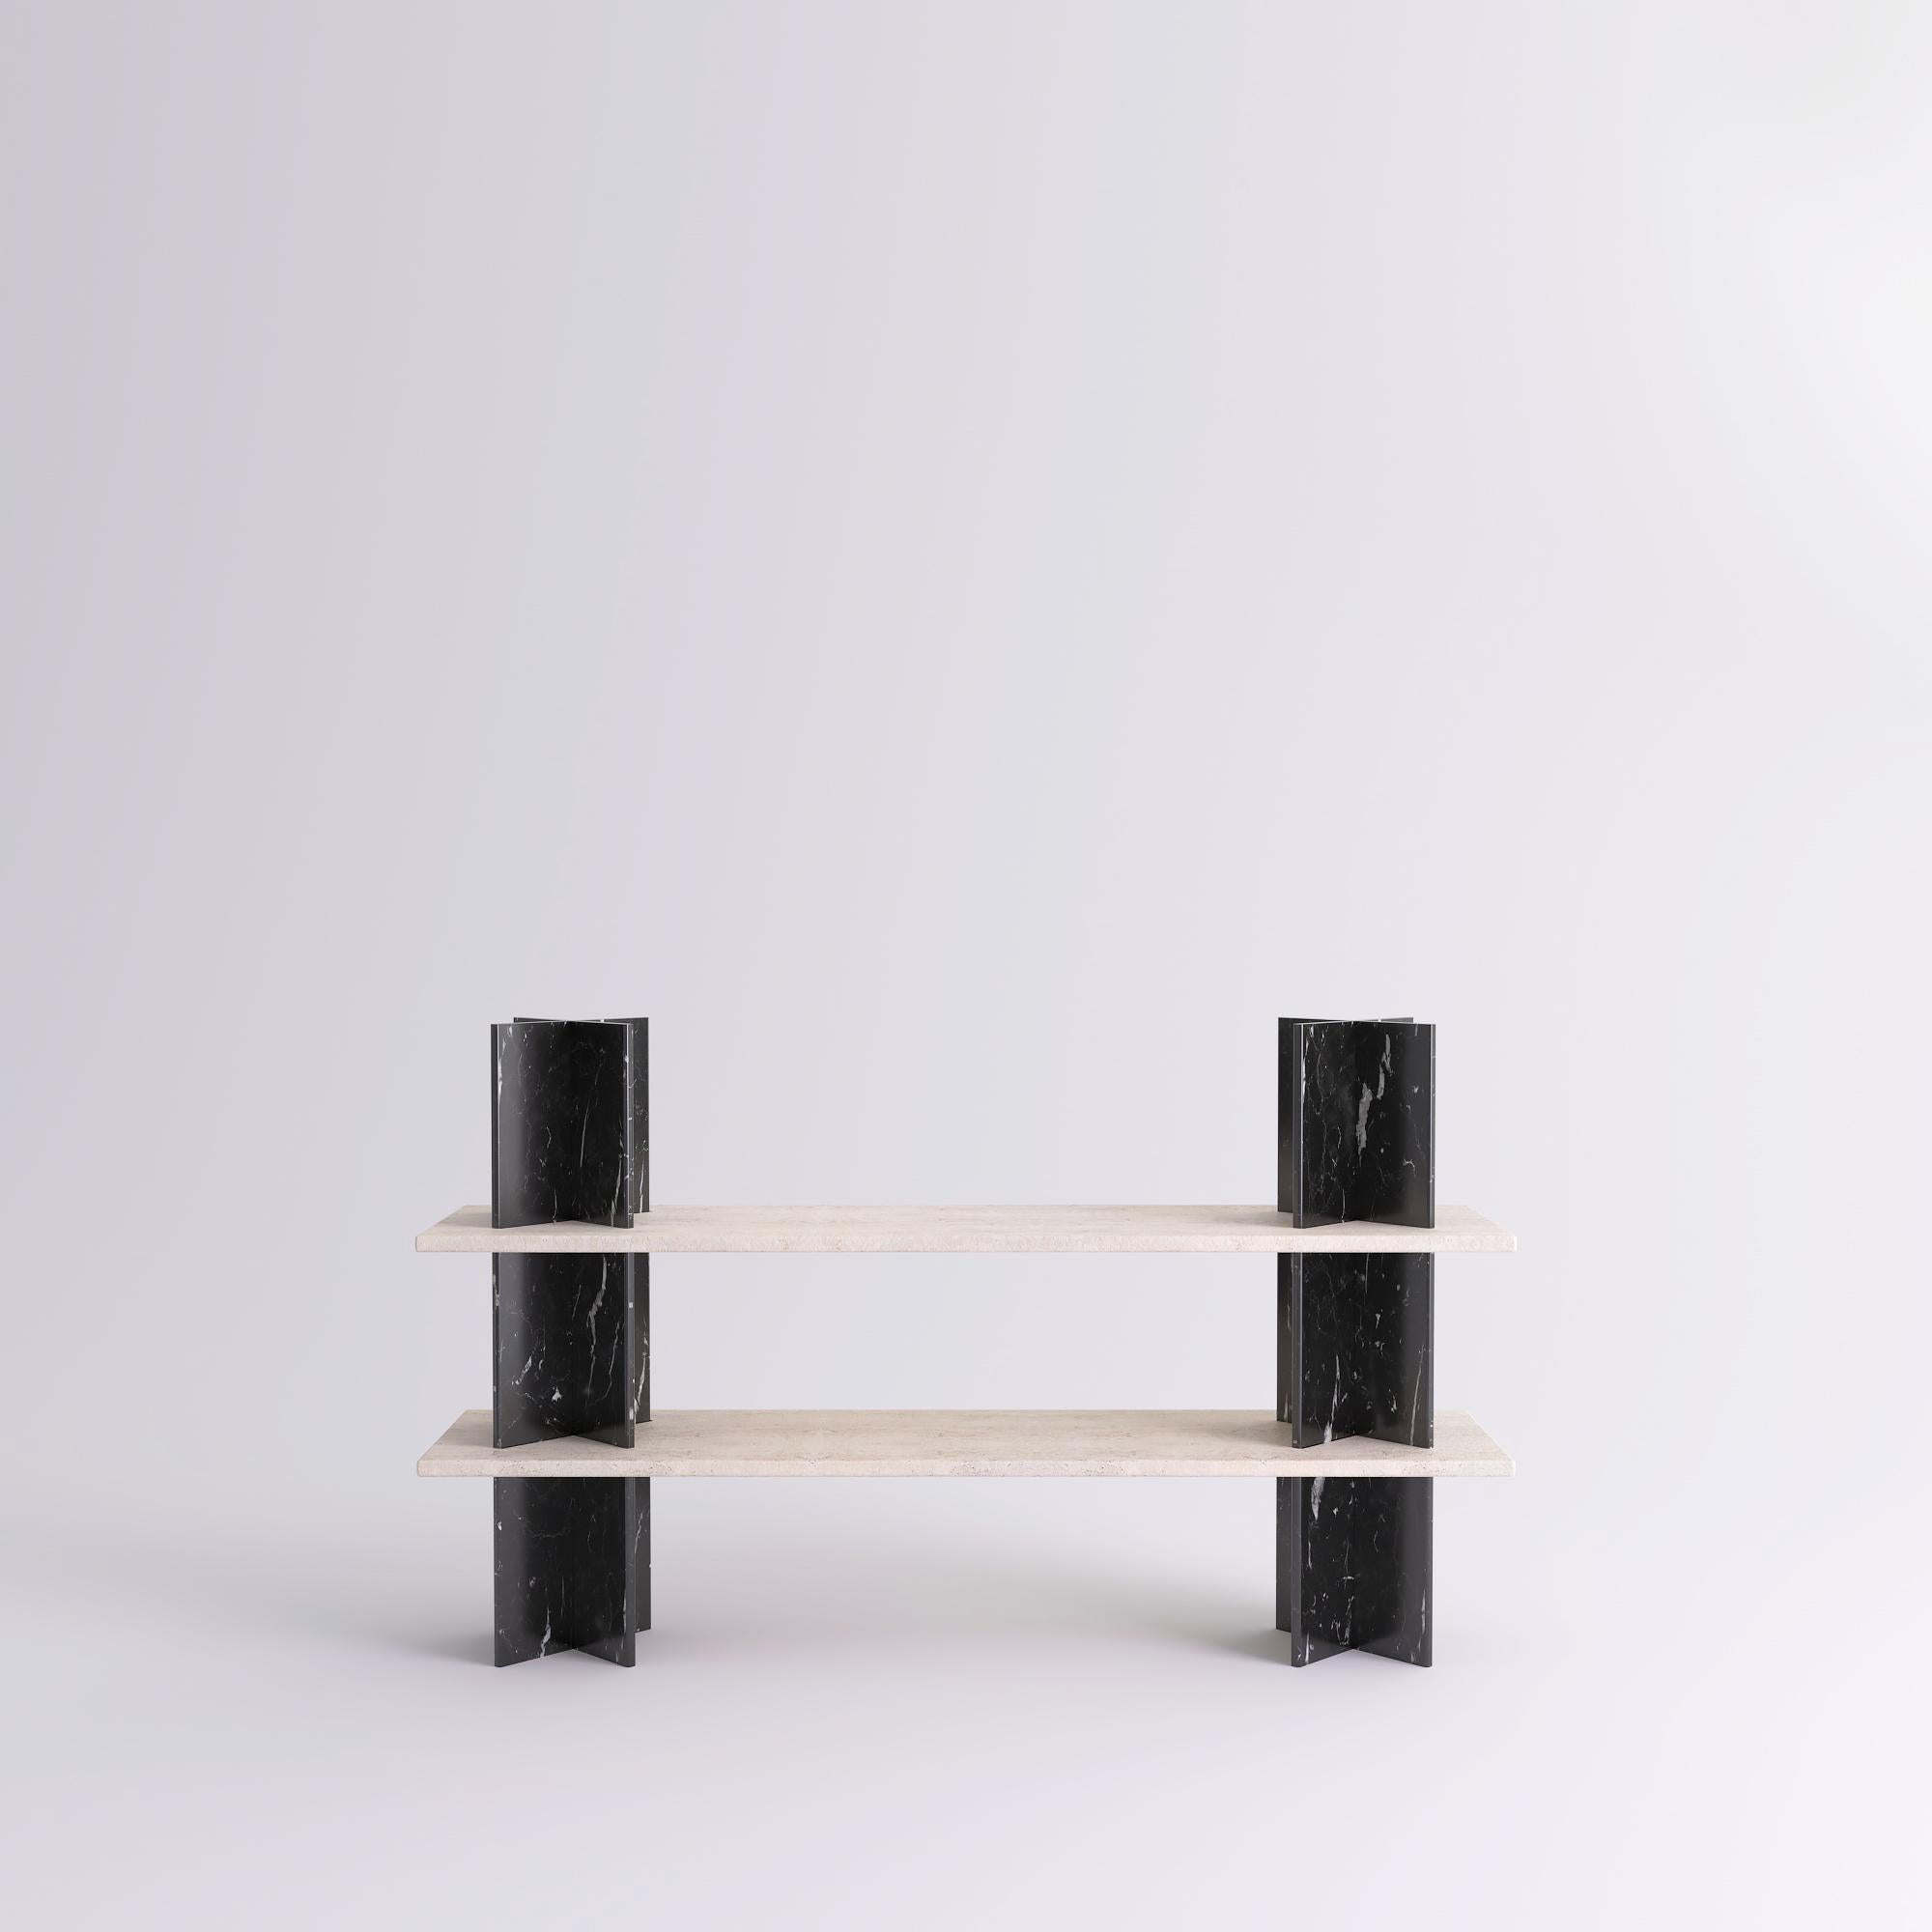 Monument shelves by Mathieu Girard & Gauthier Pouillart.
Dimensions: L 195 x H 117.
Materials: White travertine shelves - black marble (marquina) columns.
Material available: Birchwood, white marble, green marble, black marble, Pele de tigre